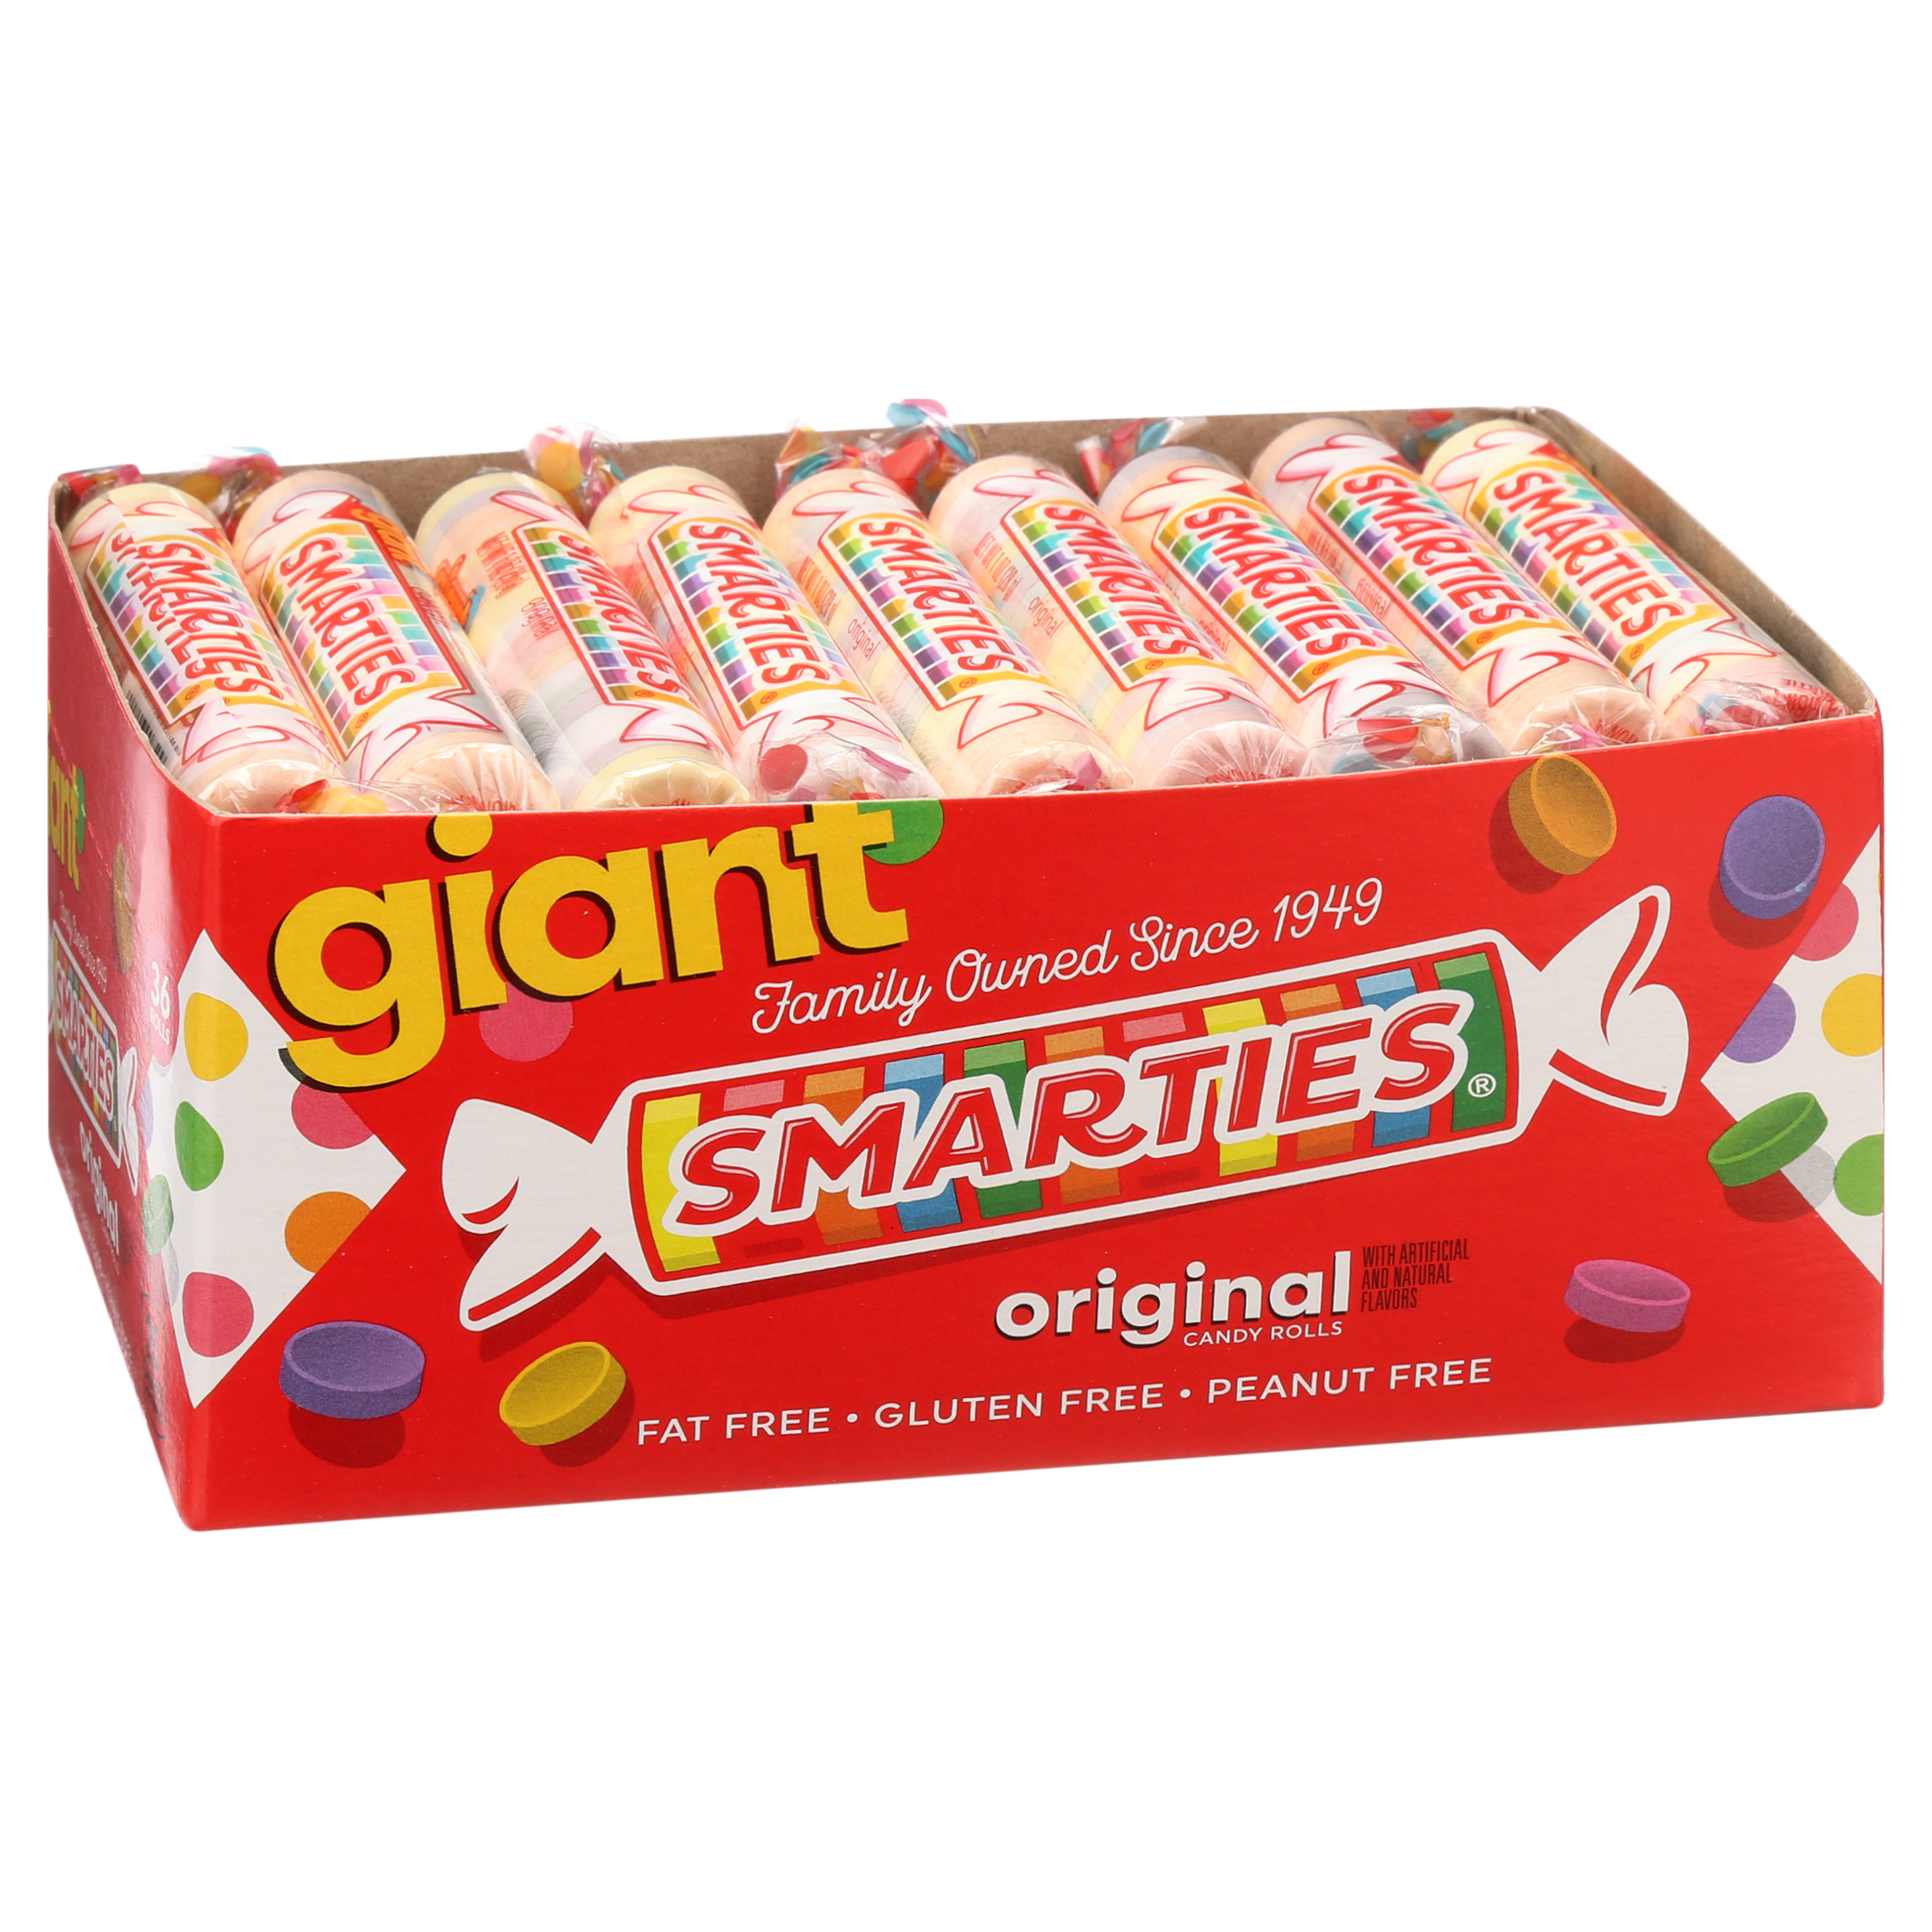 Smarties Candy Rolls, Giant, 36 Count - image 3 of 8